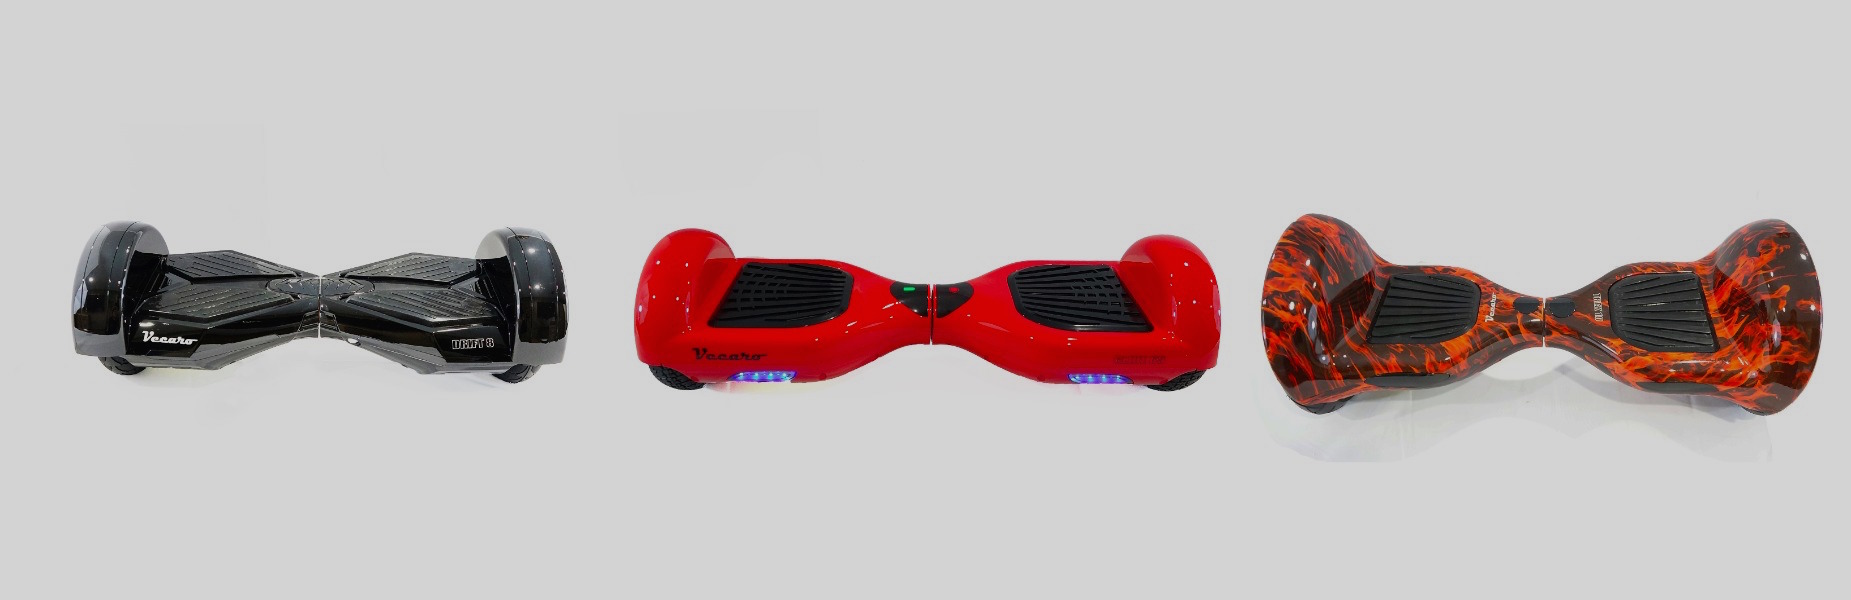 Additional Hoverboards Recalled Over Fire, Explosion Risk